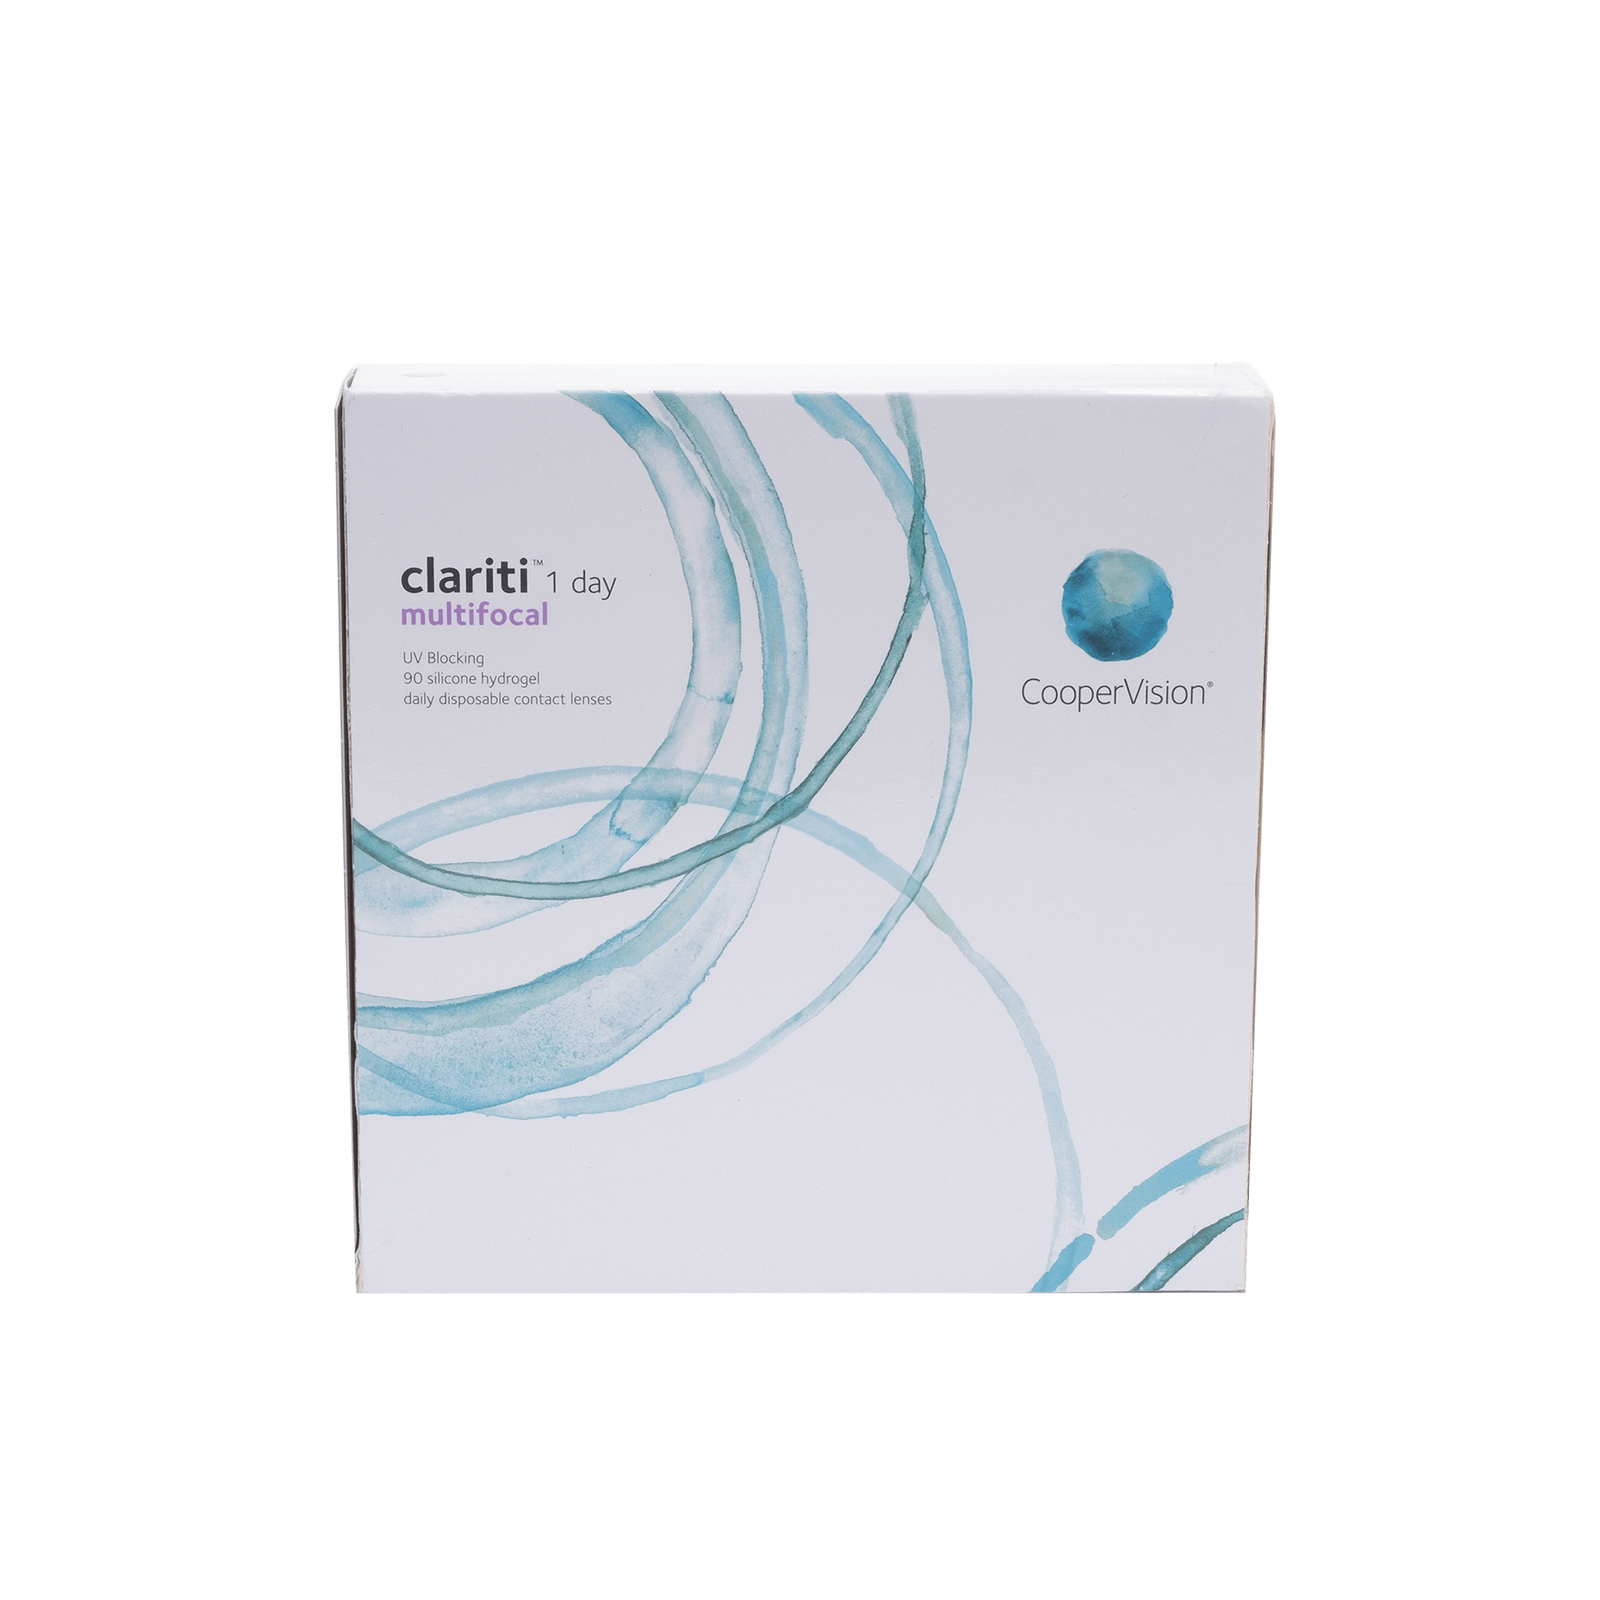 cheap-clariti-1-day-multifocal-90-pack-contact-lenses-lenses-for-less